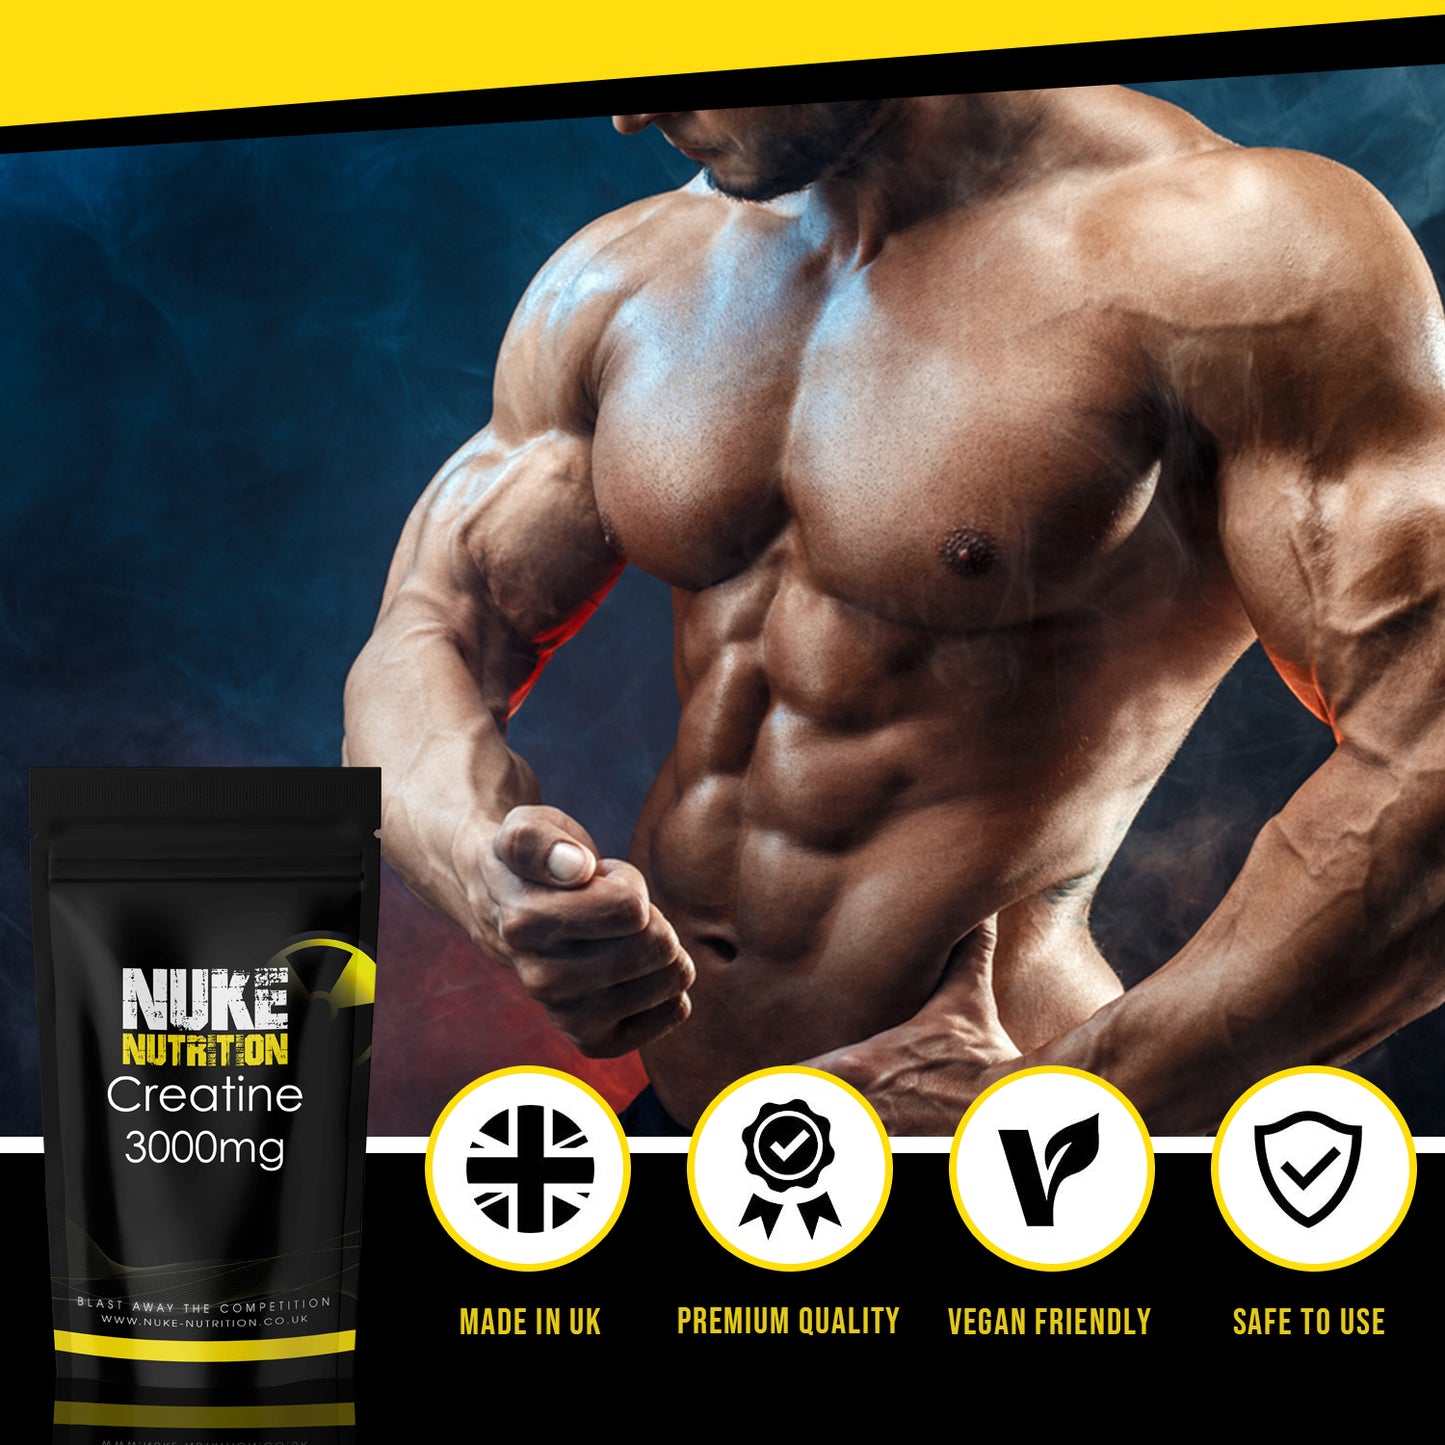 Creatine Monohydrate Capsules 3000mg Serving Muscle Growth & Strength Capsules